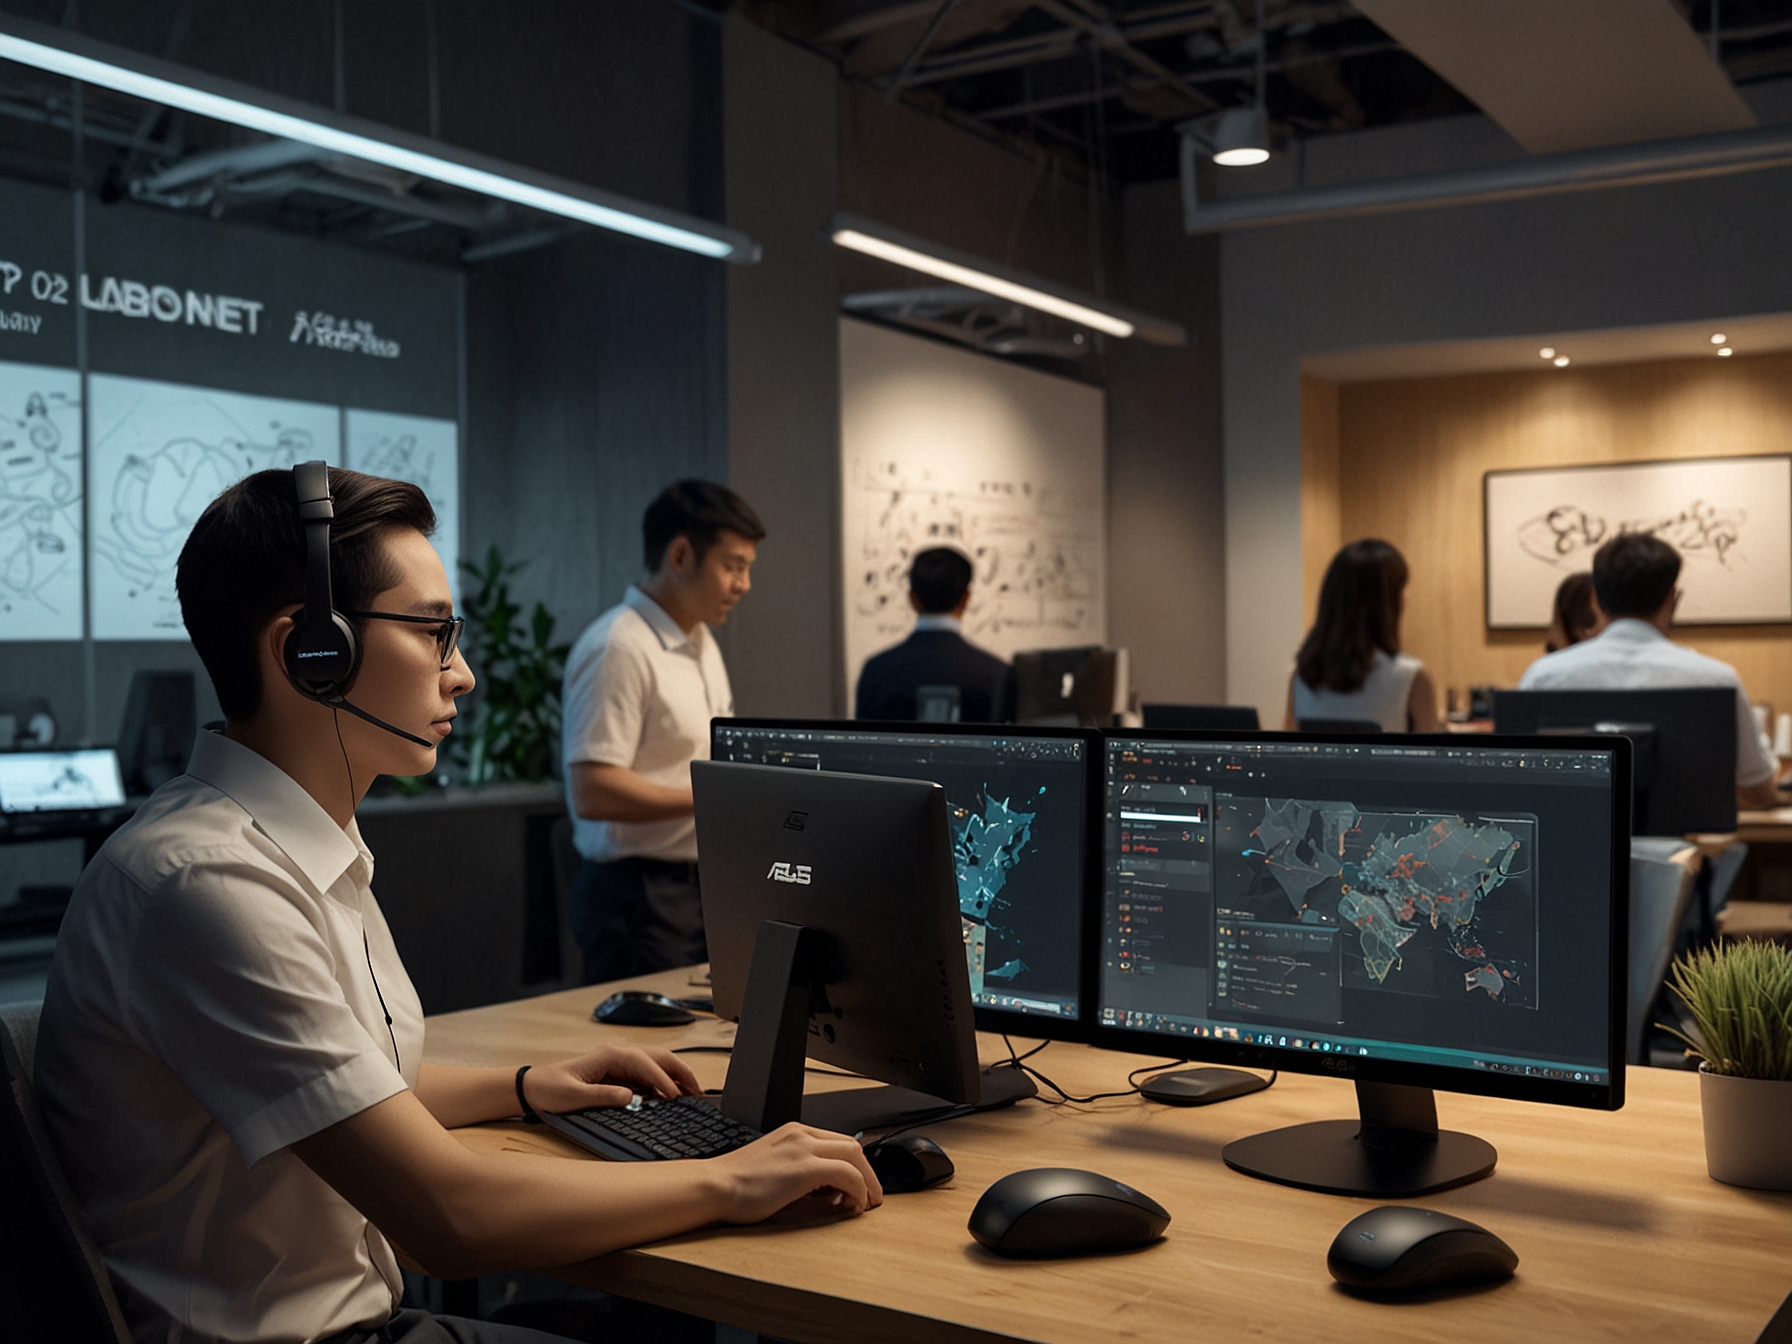 A visual of new Asus customer service initiatives, including a dedicated RMA task force, improved communication channels, and real-time tracking to enhance customer satisfaction.